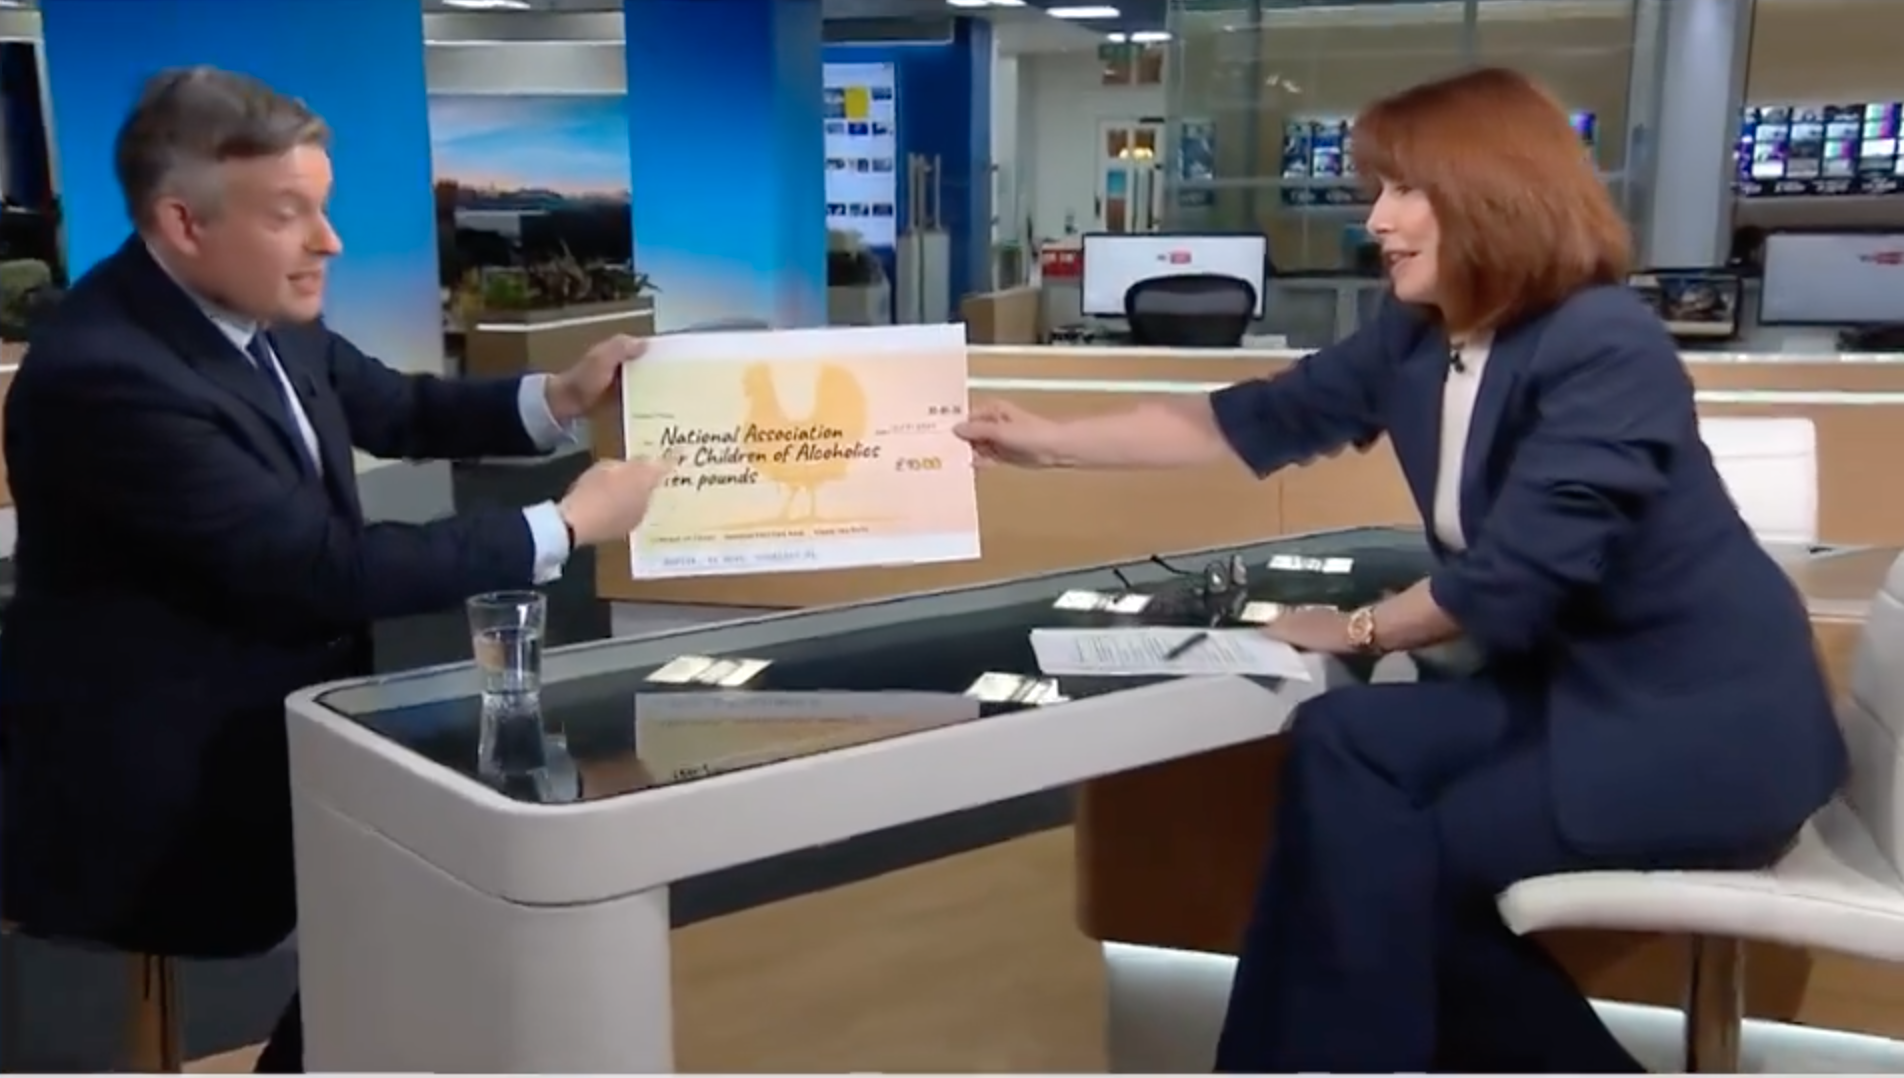 Sunak Chickened Out: Labour Shadow Minister Pays Up After Lost Bet With Sky News Kay Burley [Video]